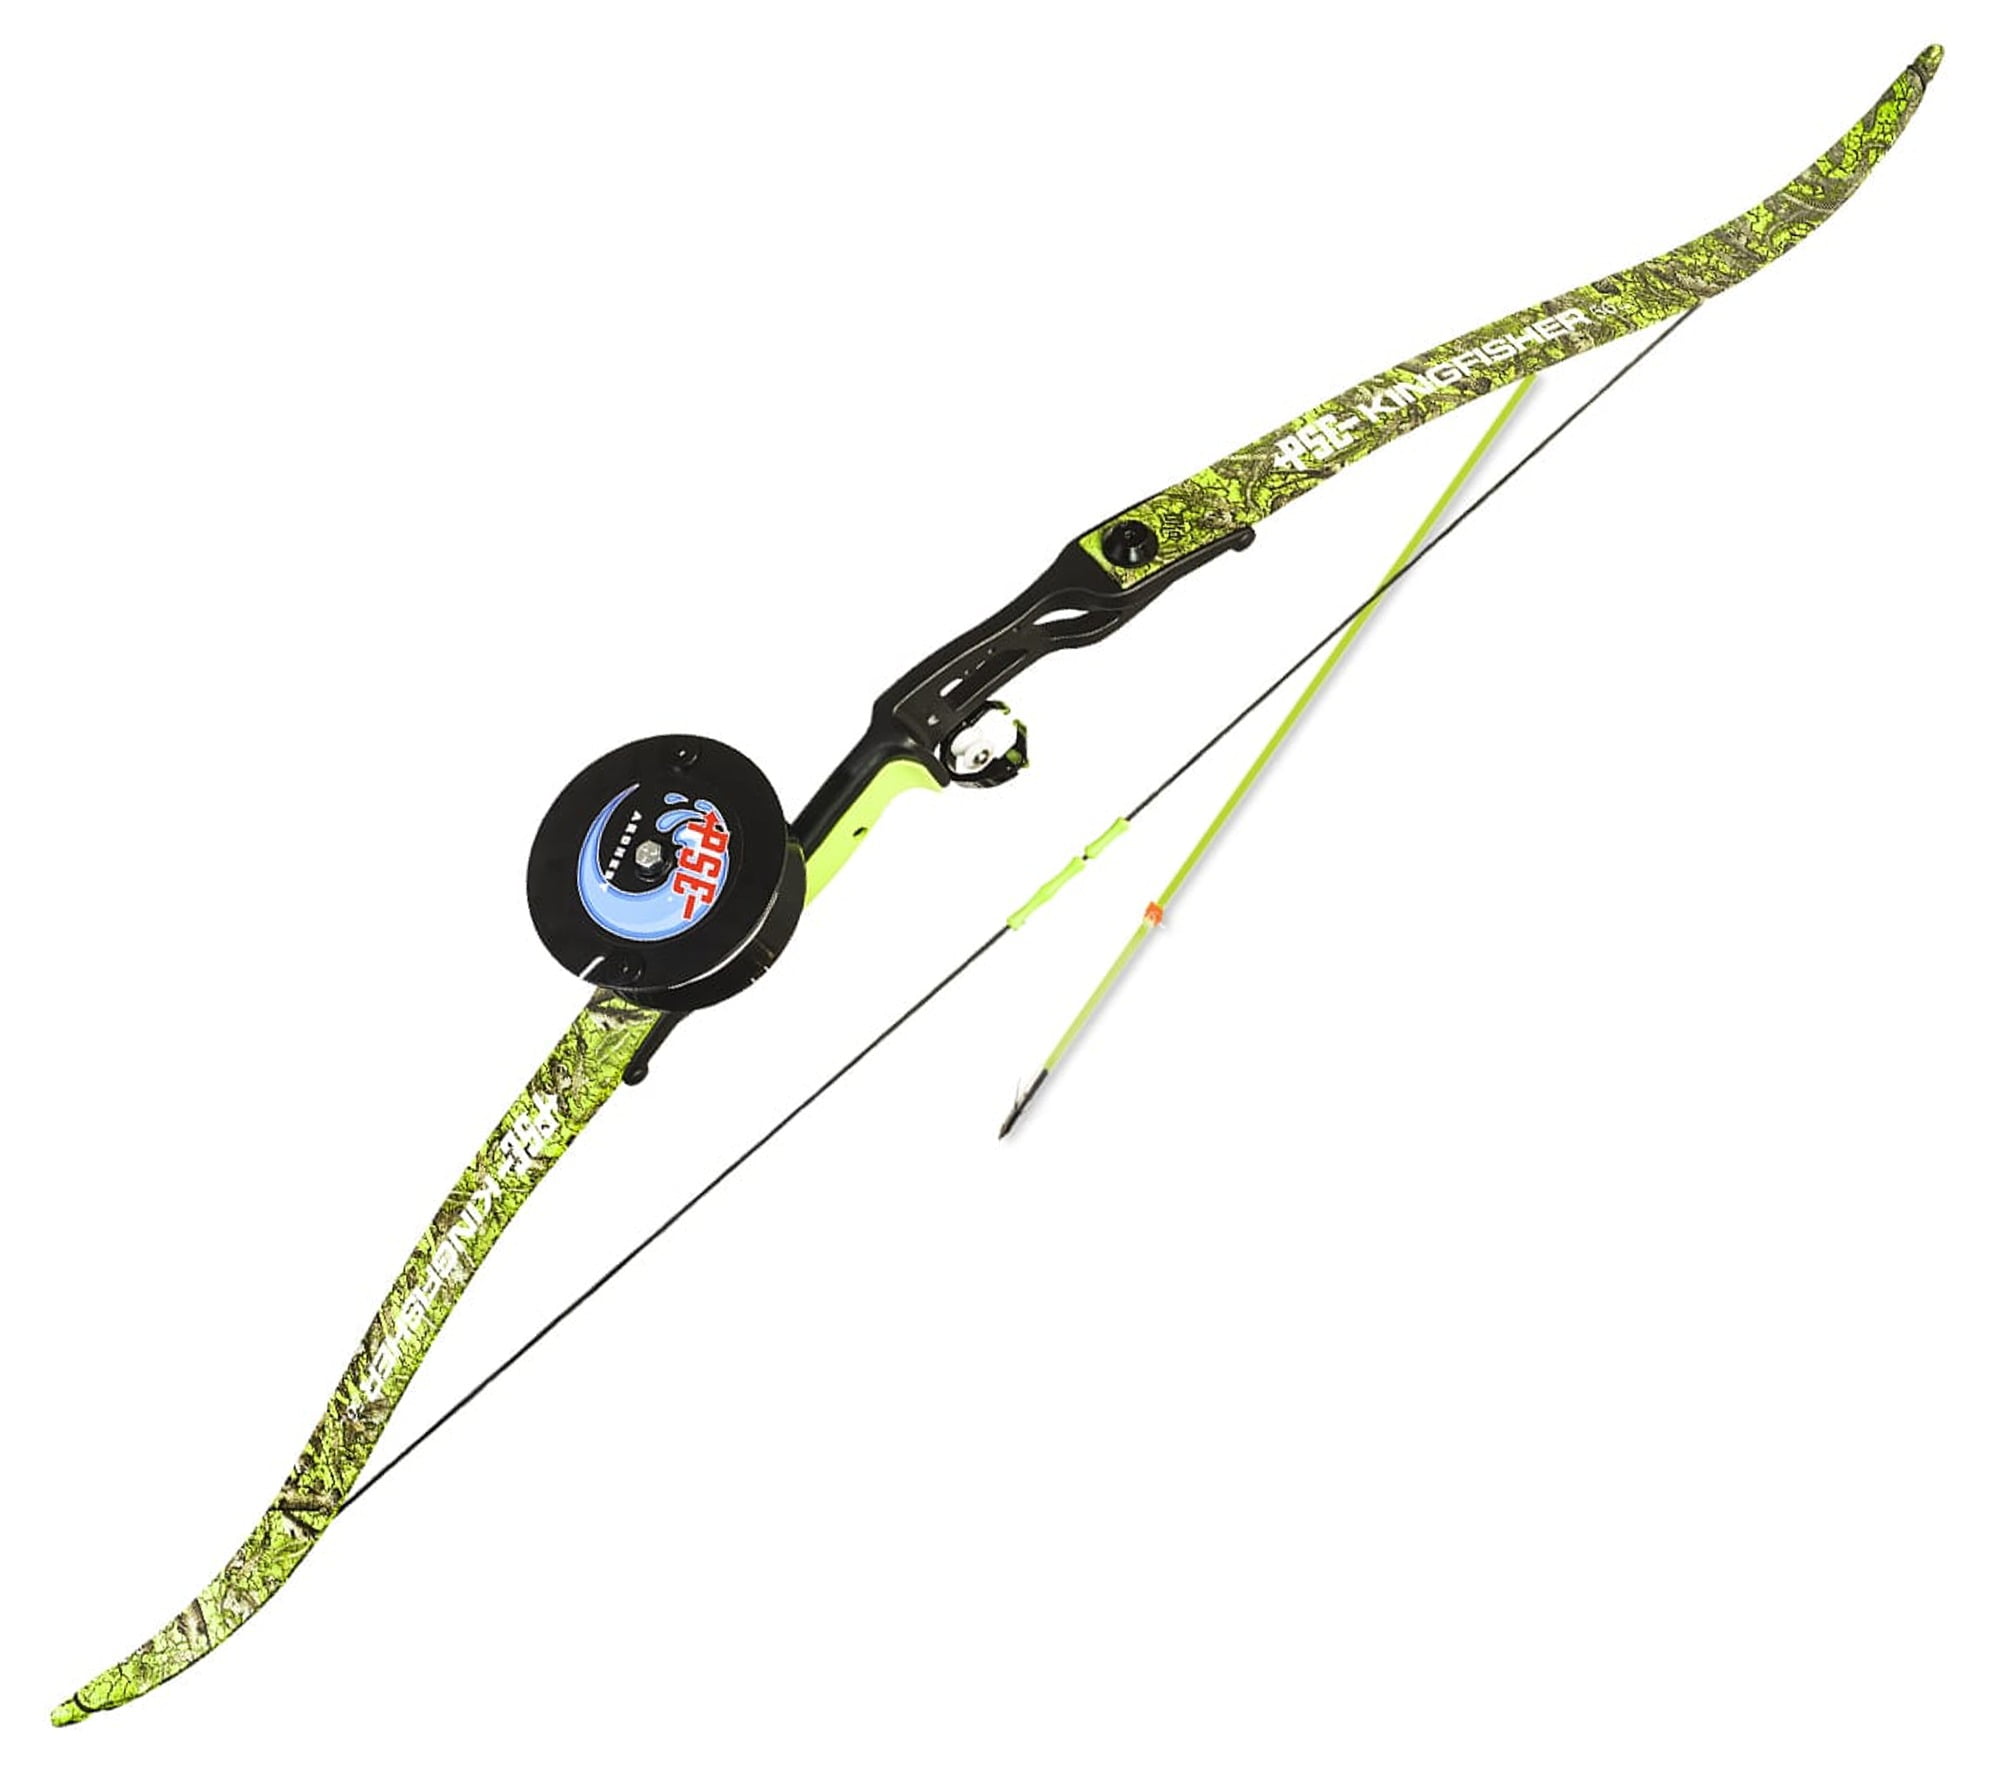 PSE Kingfisher Bowfishing Right hand Bow Only